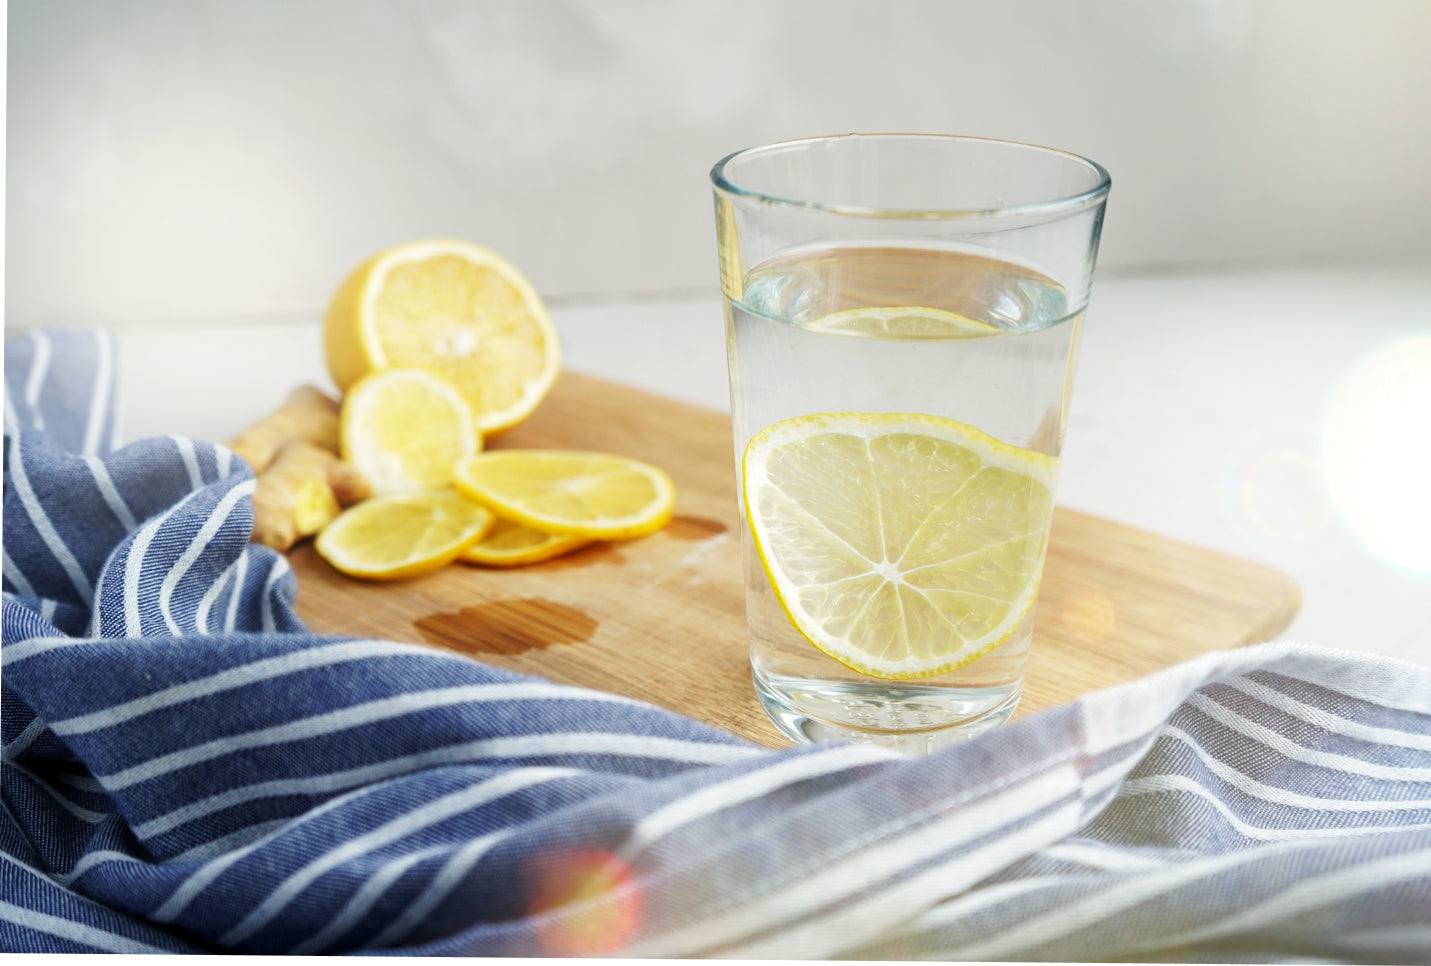 Can Lemon Water Help With Bloating?